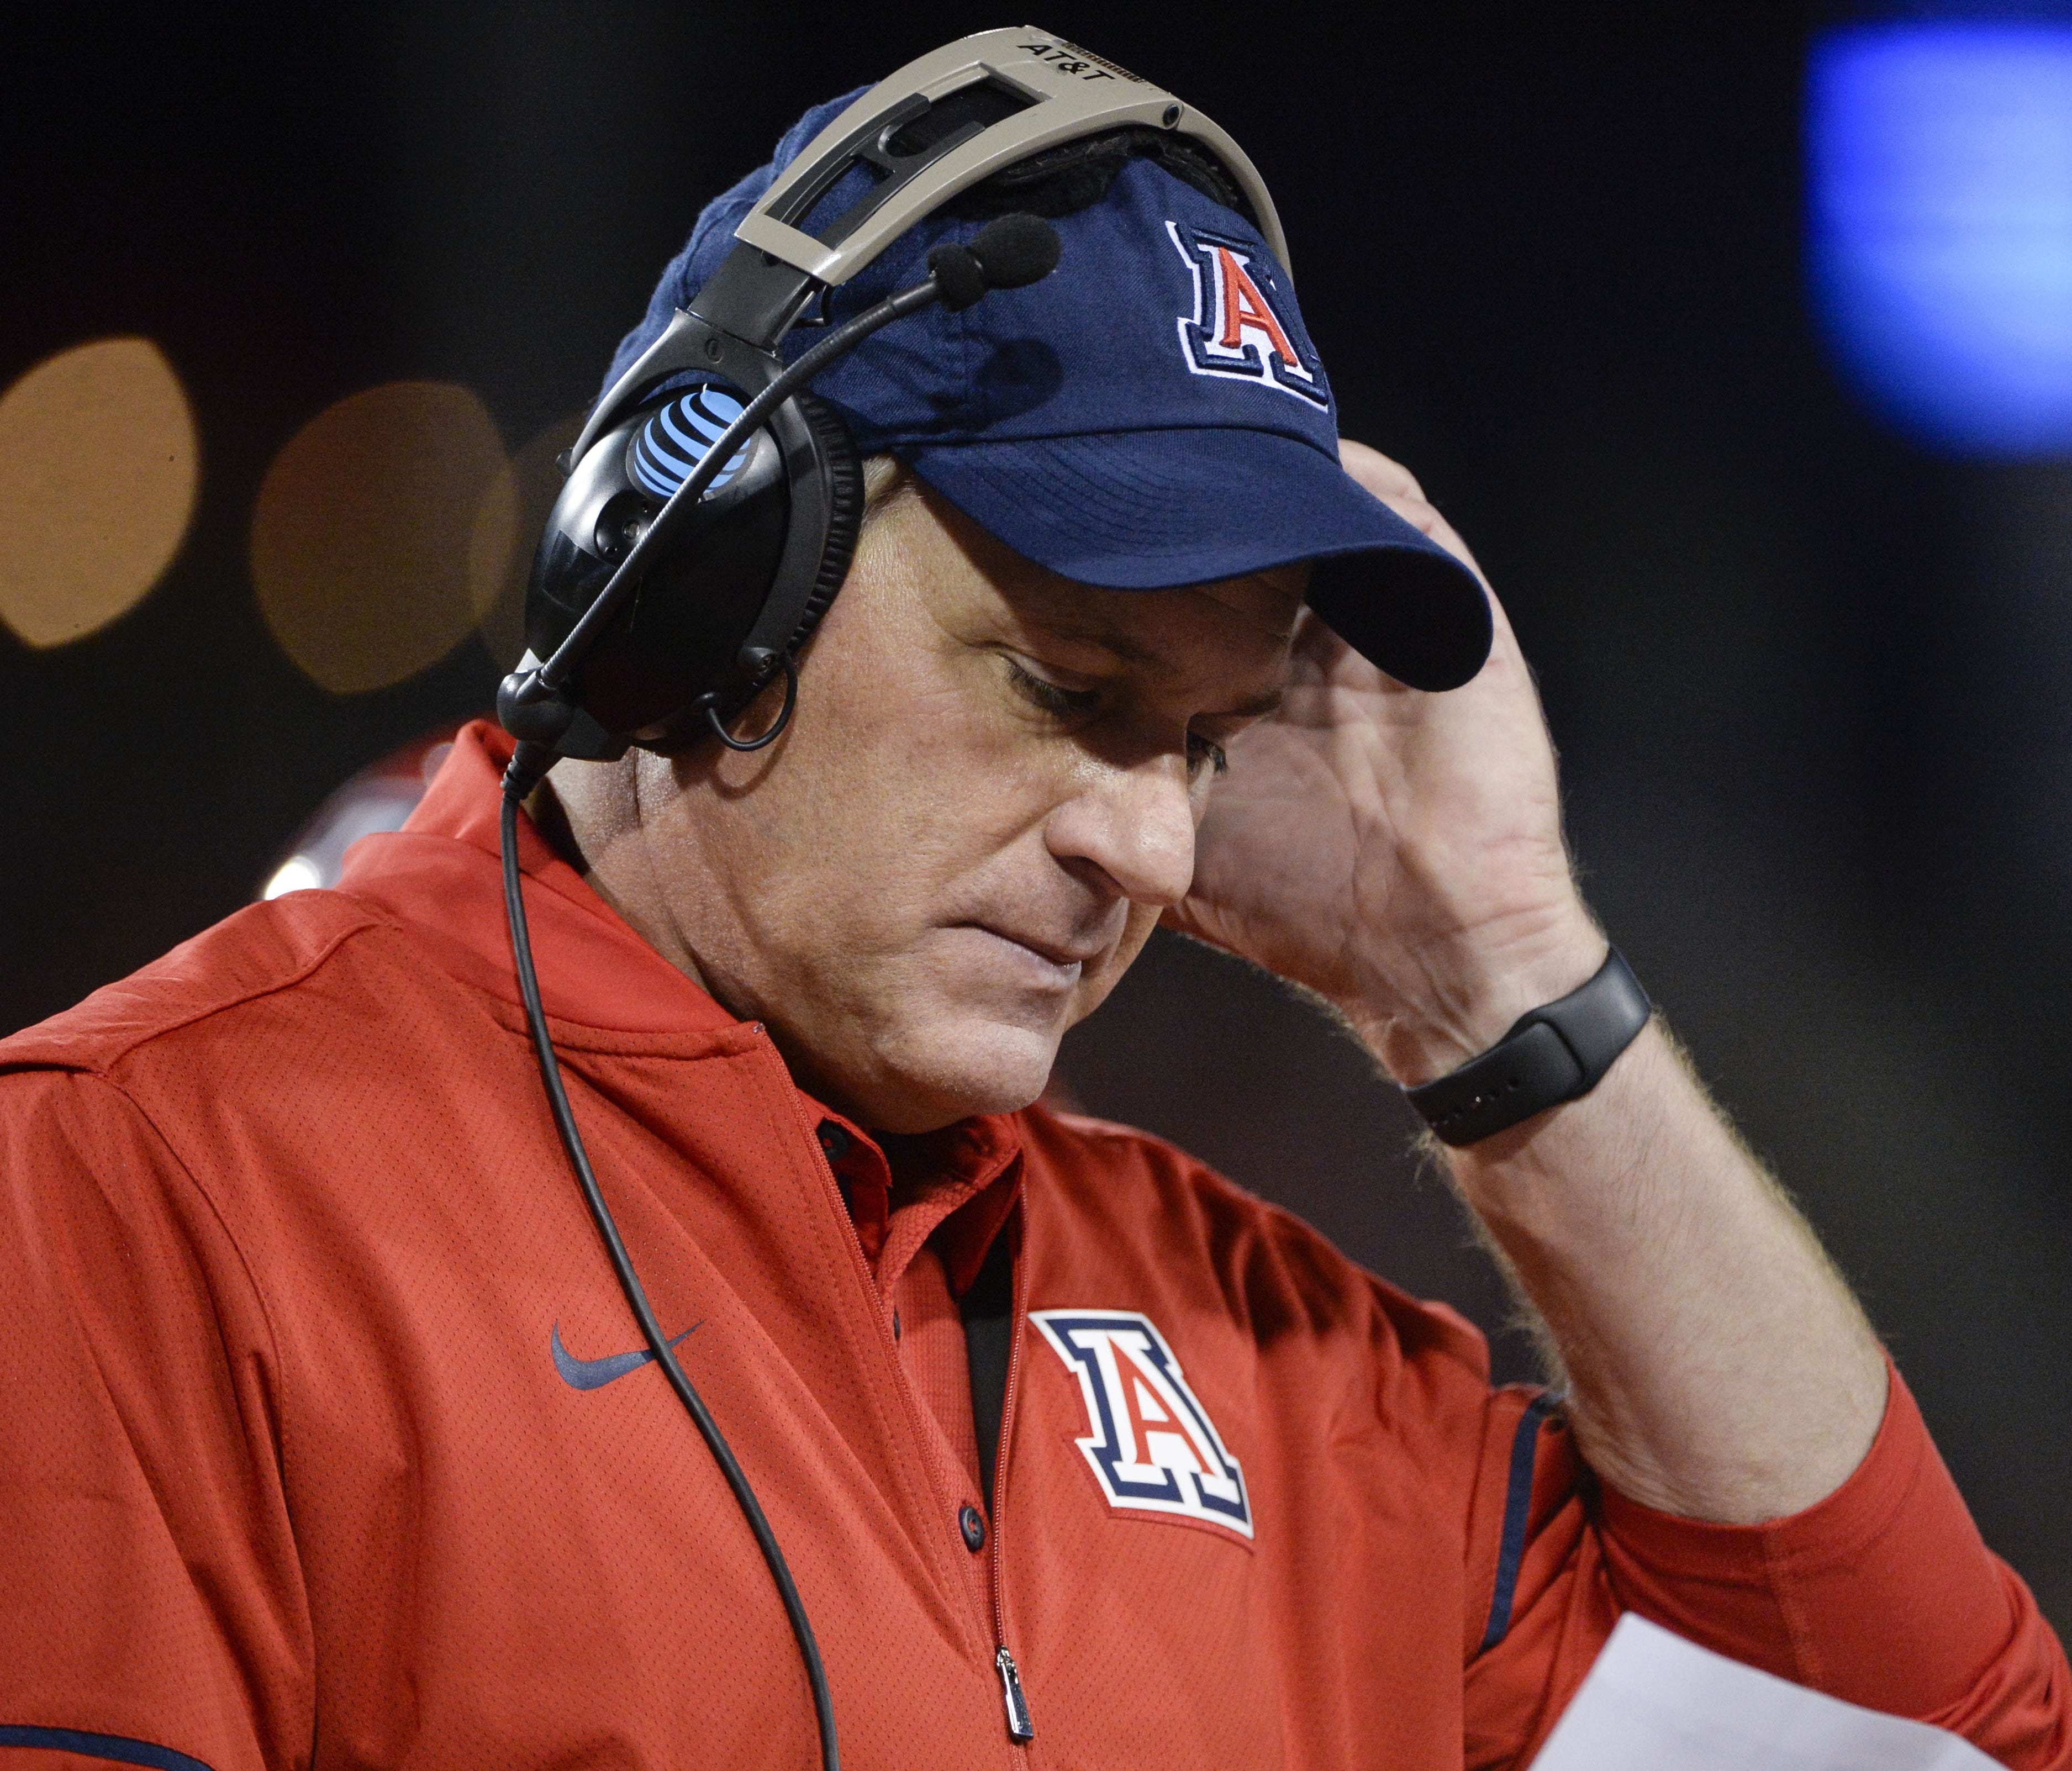 Rich Rodriguez was fired as the University of Arizona's head football coach after a notice of claim alleging a hostile workplace was filed.